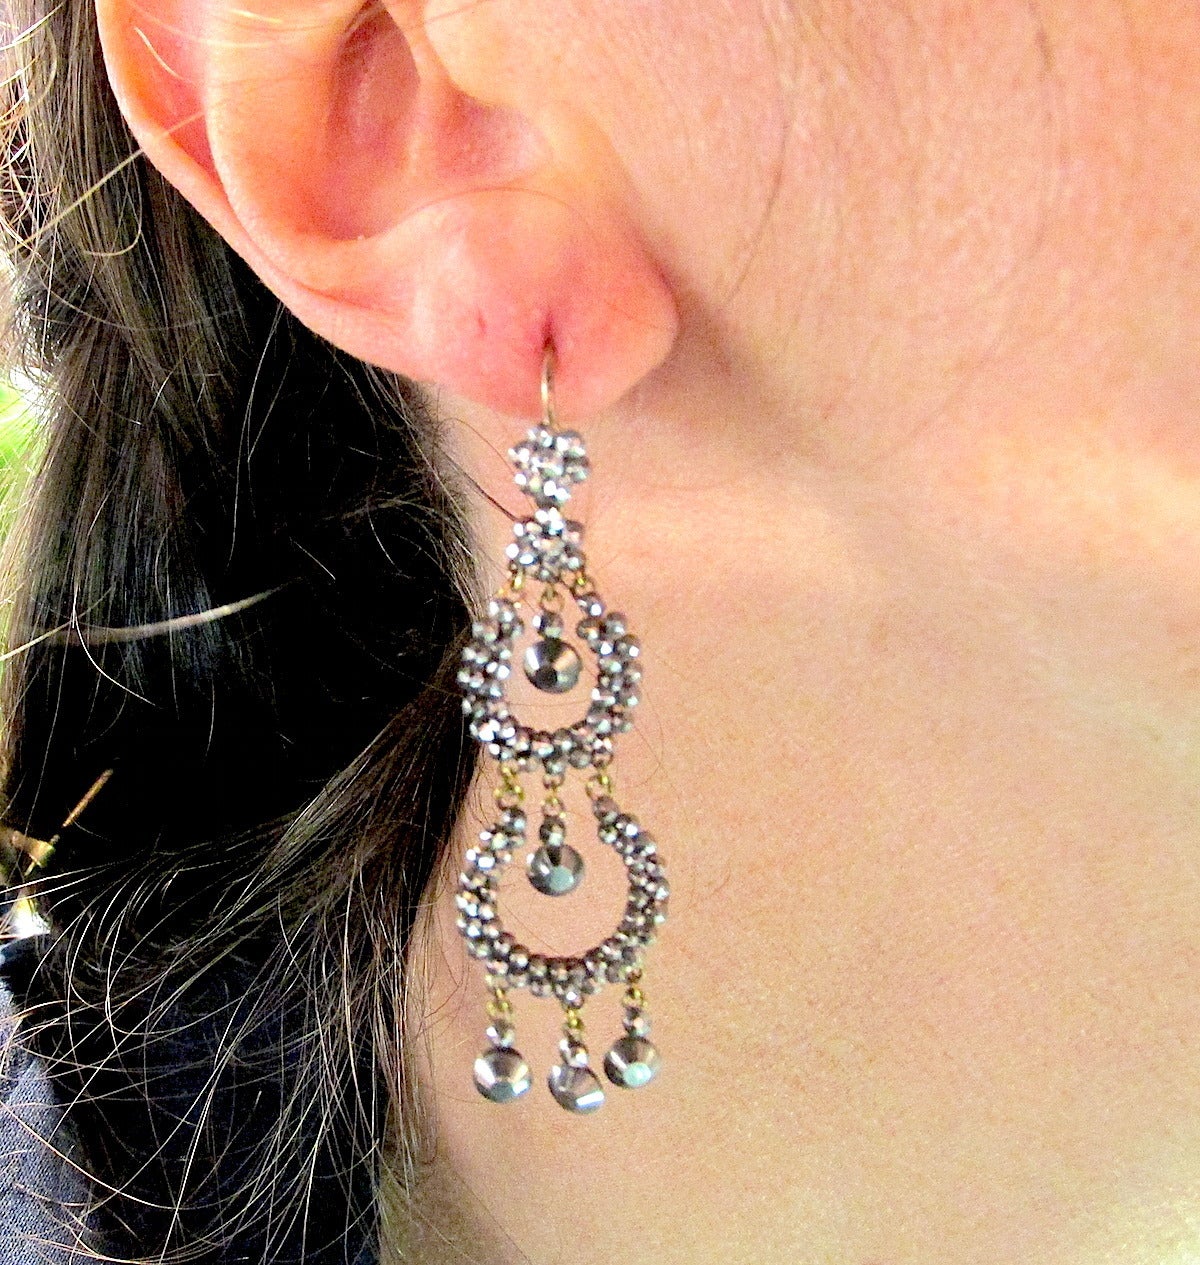 Sparkling Victorian cut steel earrings with two circles and five drops. Their movement will glitter and glisten with every movement. Fun to wear day or night. The earrings measure 2